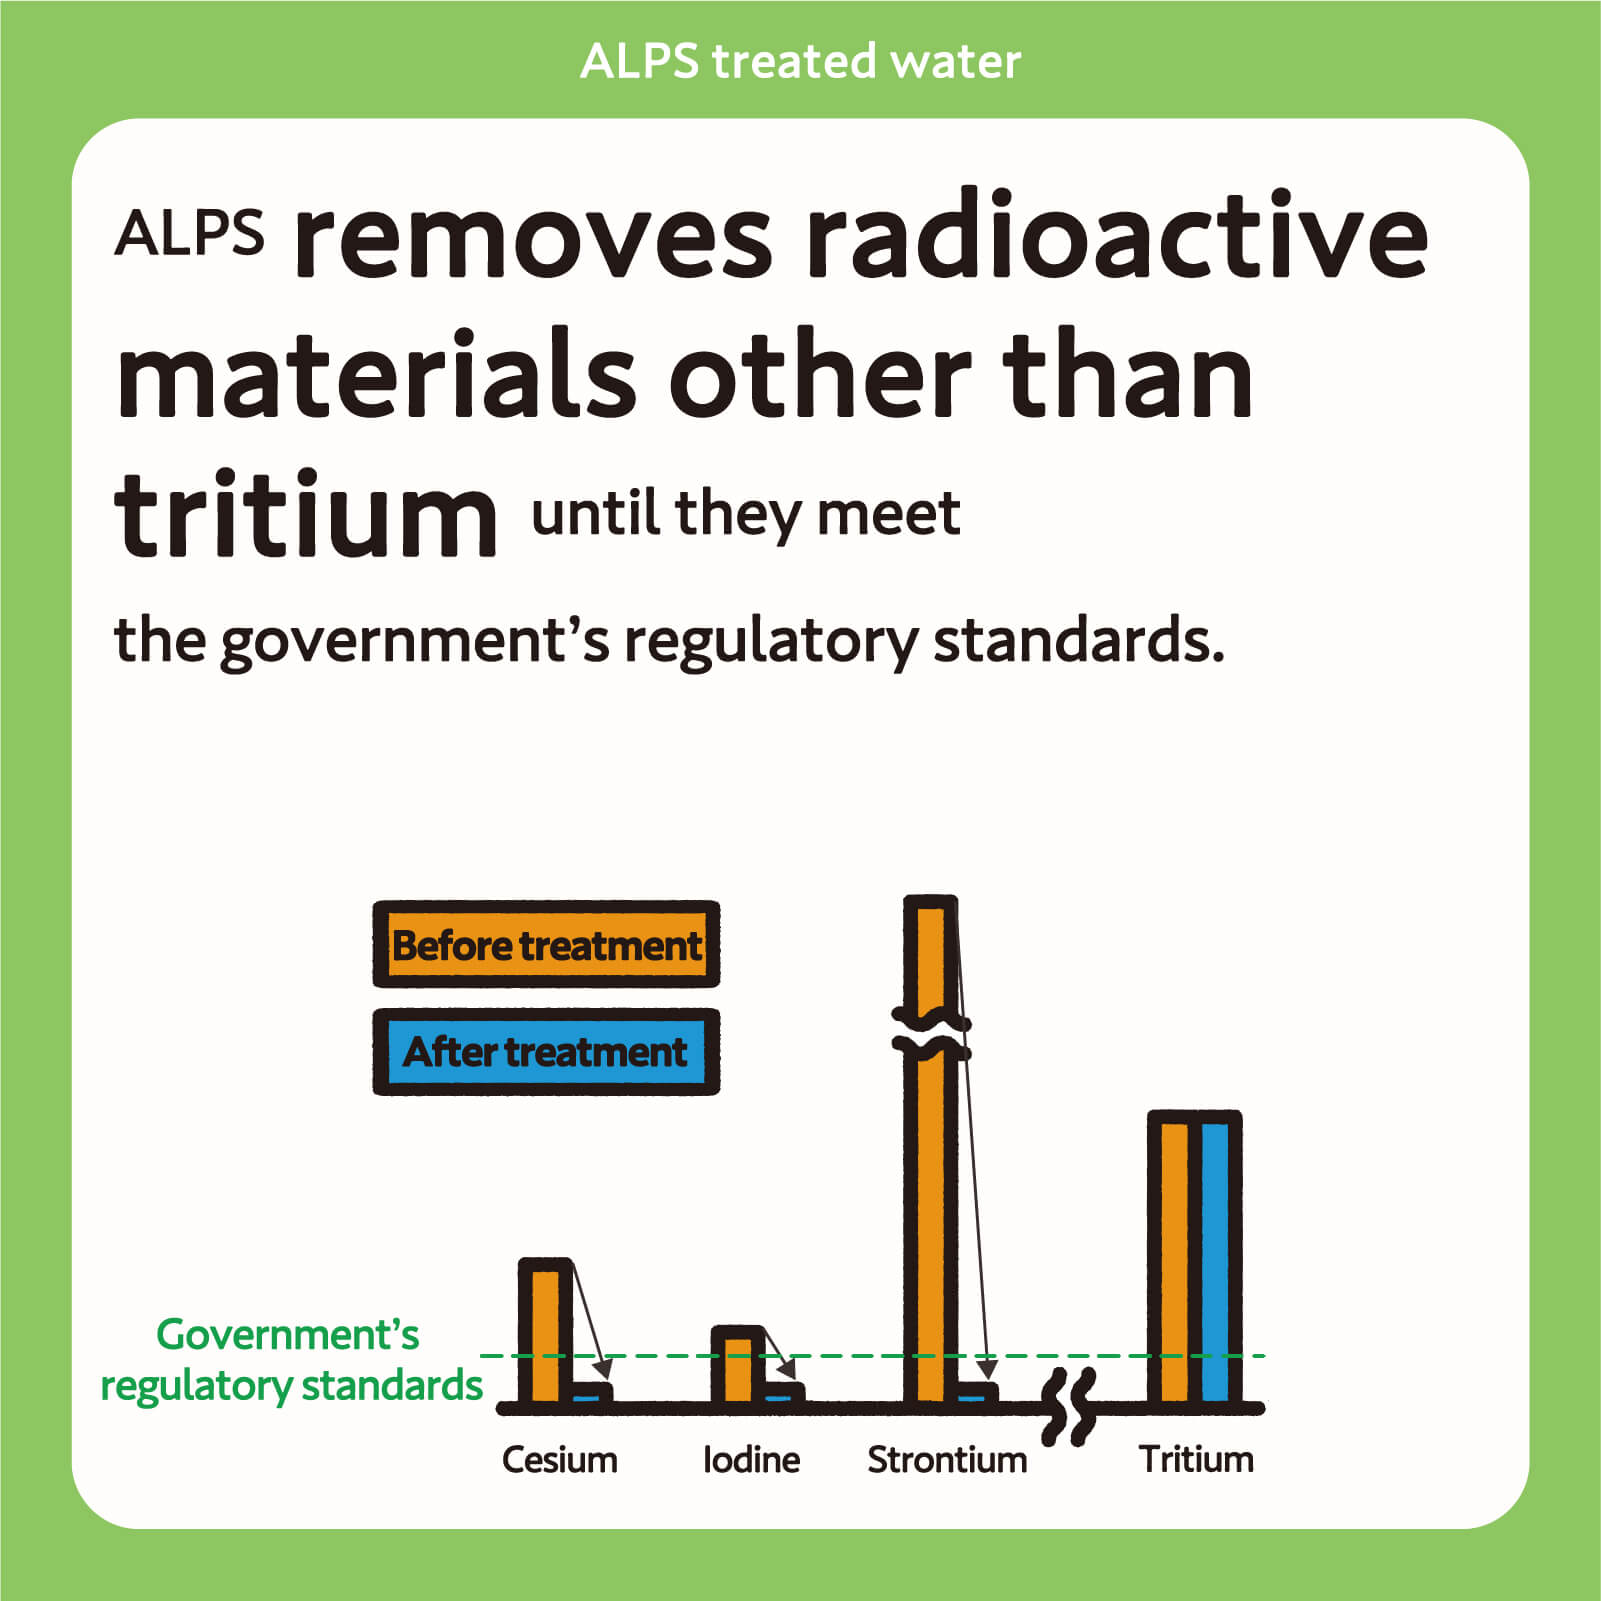 ALPS  removes radioactive materials other than tritium until they meet the government’s regulatory standards.